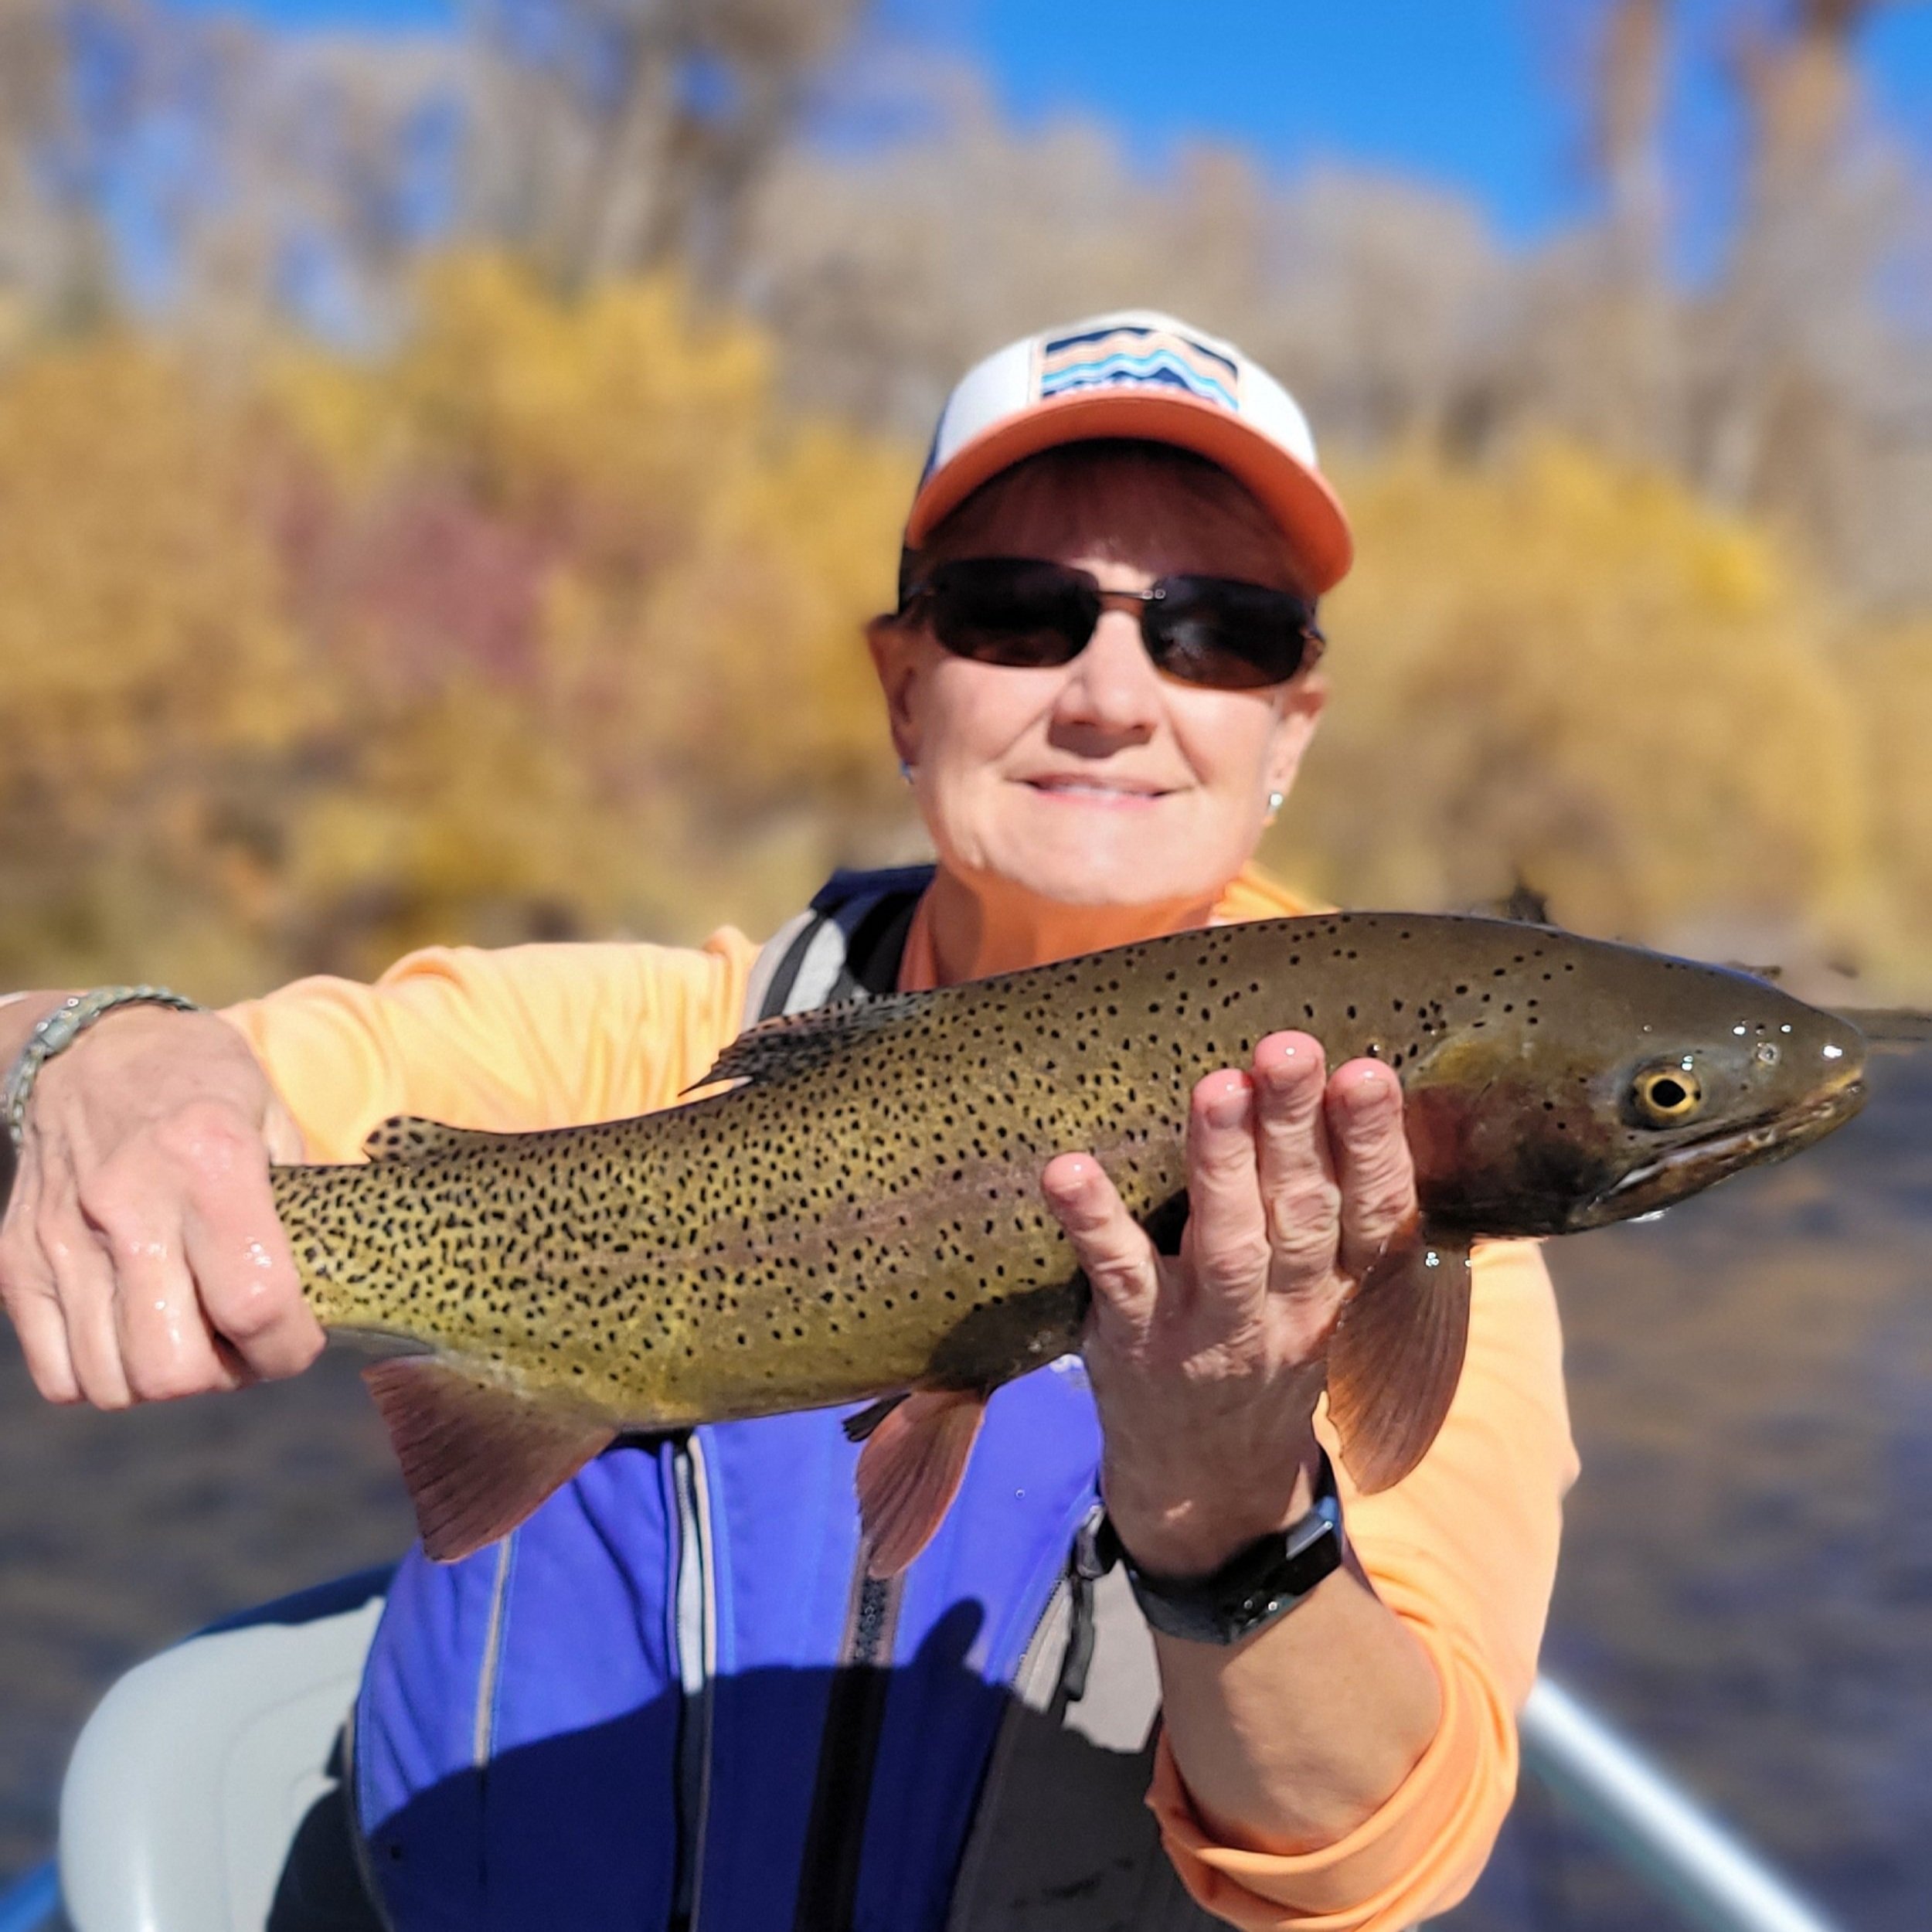 Jackalope Anglers GUIDED FLY FISHING ON THE RIO GRANDE RIVER